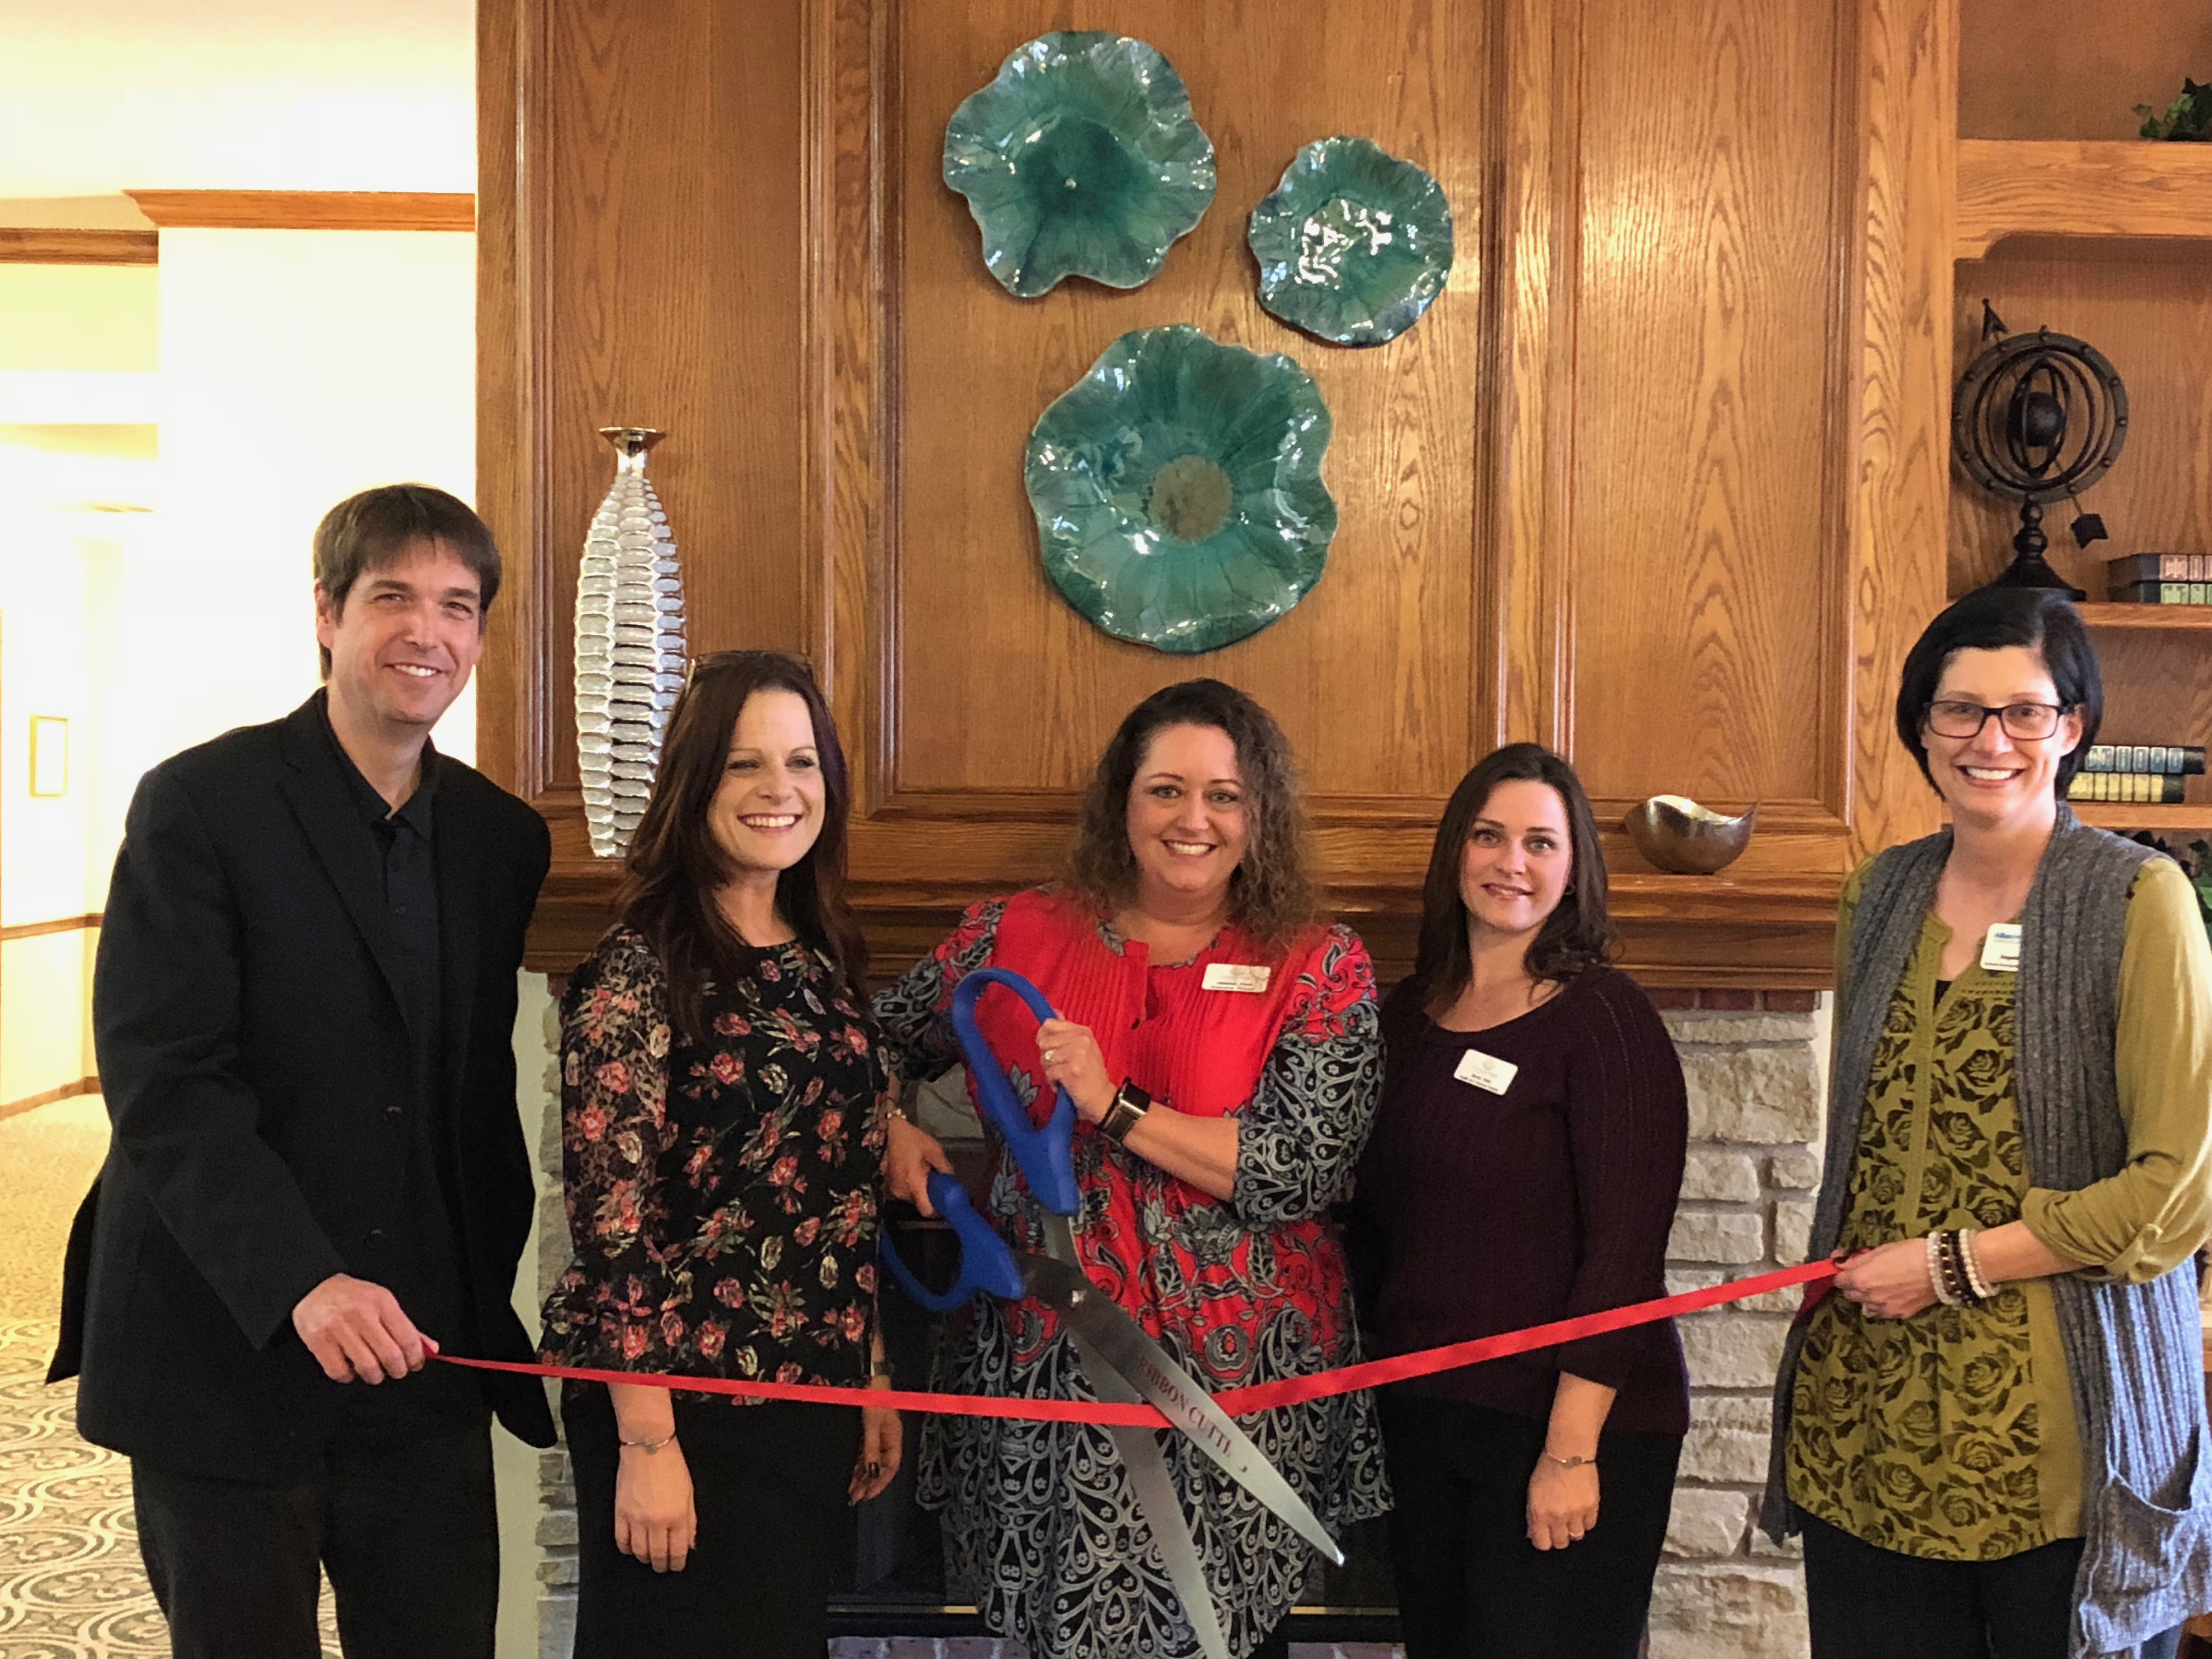 Creekside Village recognized with ribbon cutting